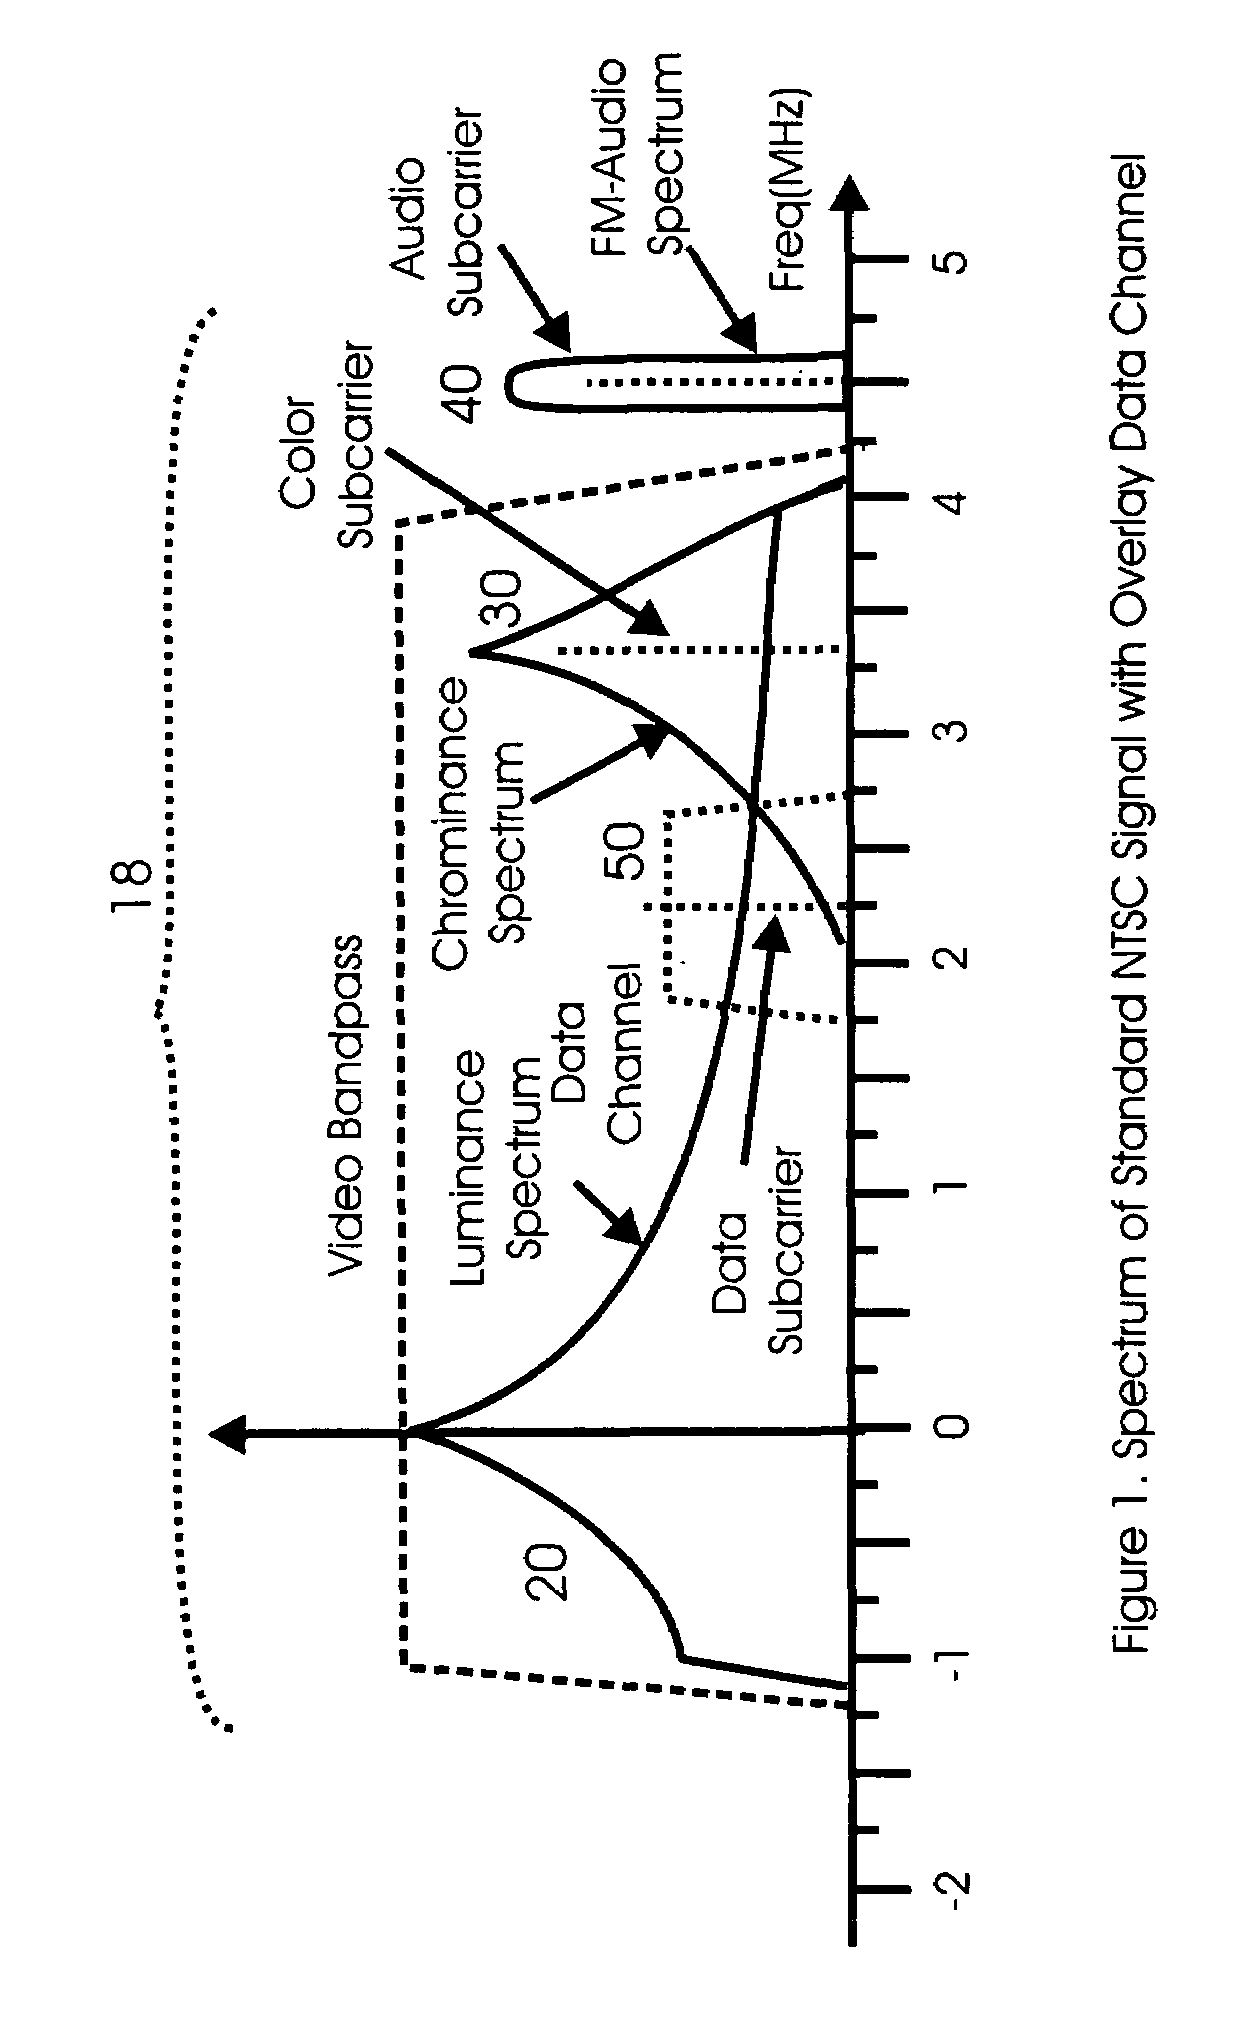 System and method for nondisruptively embedding an OFDM modulated data signal into a composite video signal